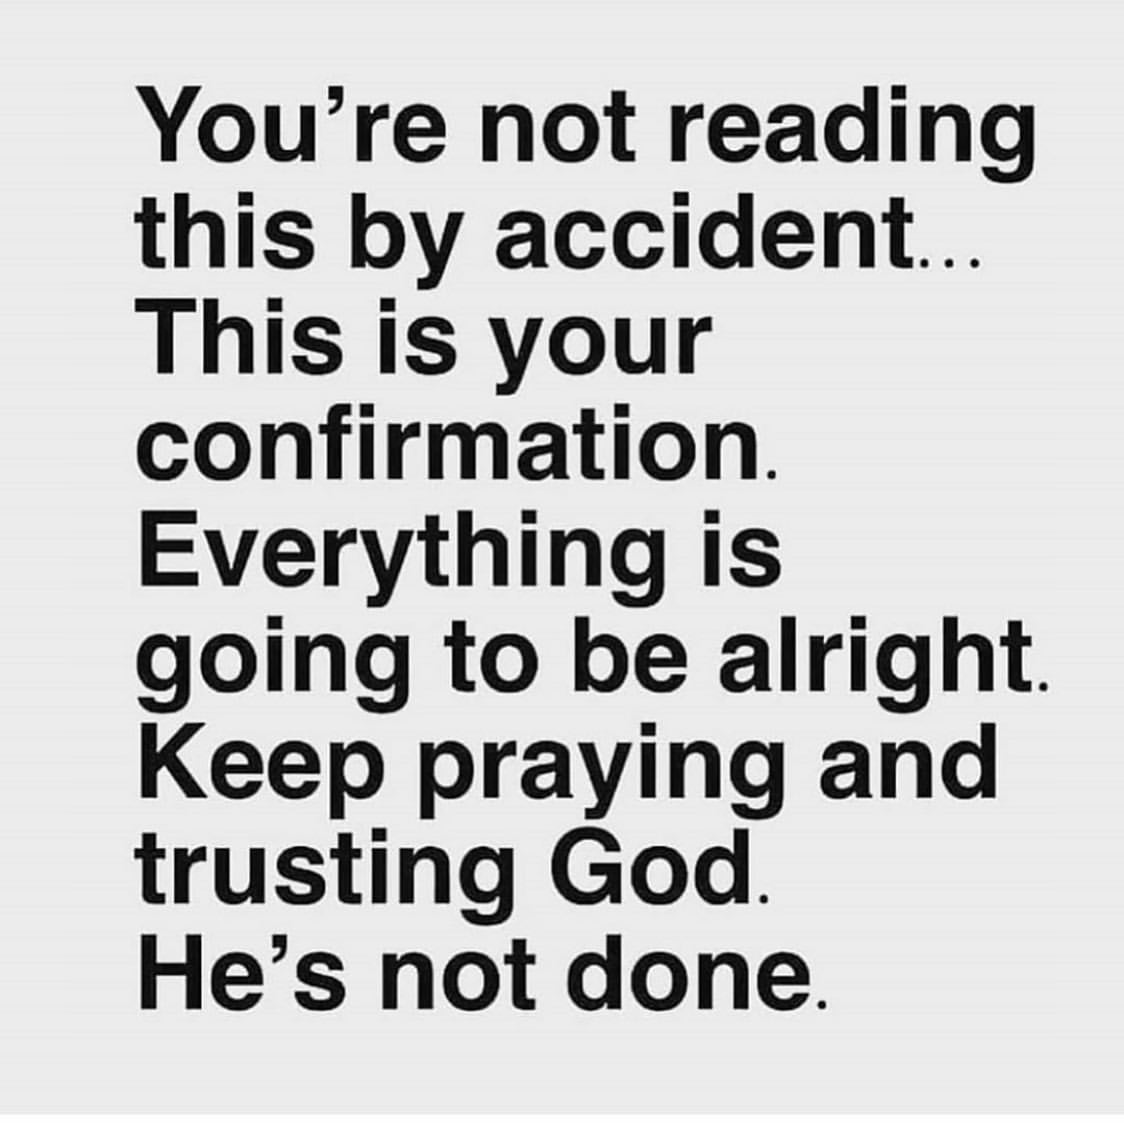 You're not reading this by accident... This is your confirmation. Everything is going to be alright. Keep praying and trusting God. He's not done.